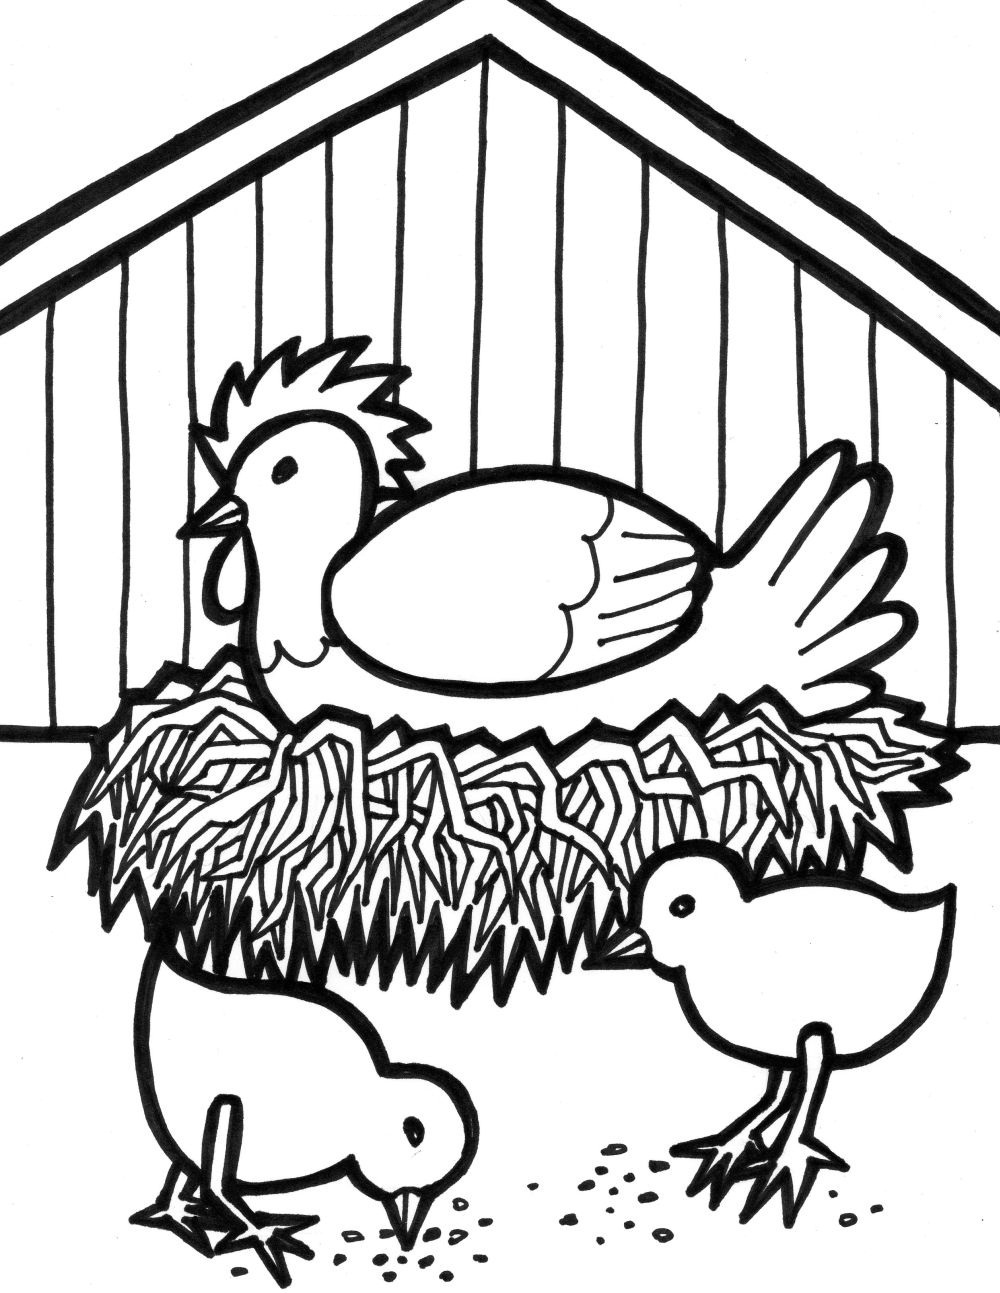 DIY Farm Crafts and Activities with #33 Farm Coloring Pages - Page 2 of 2